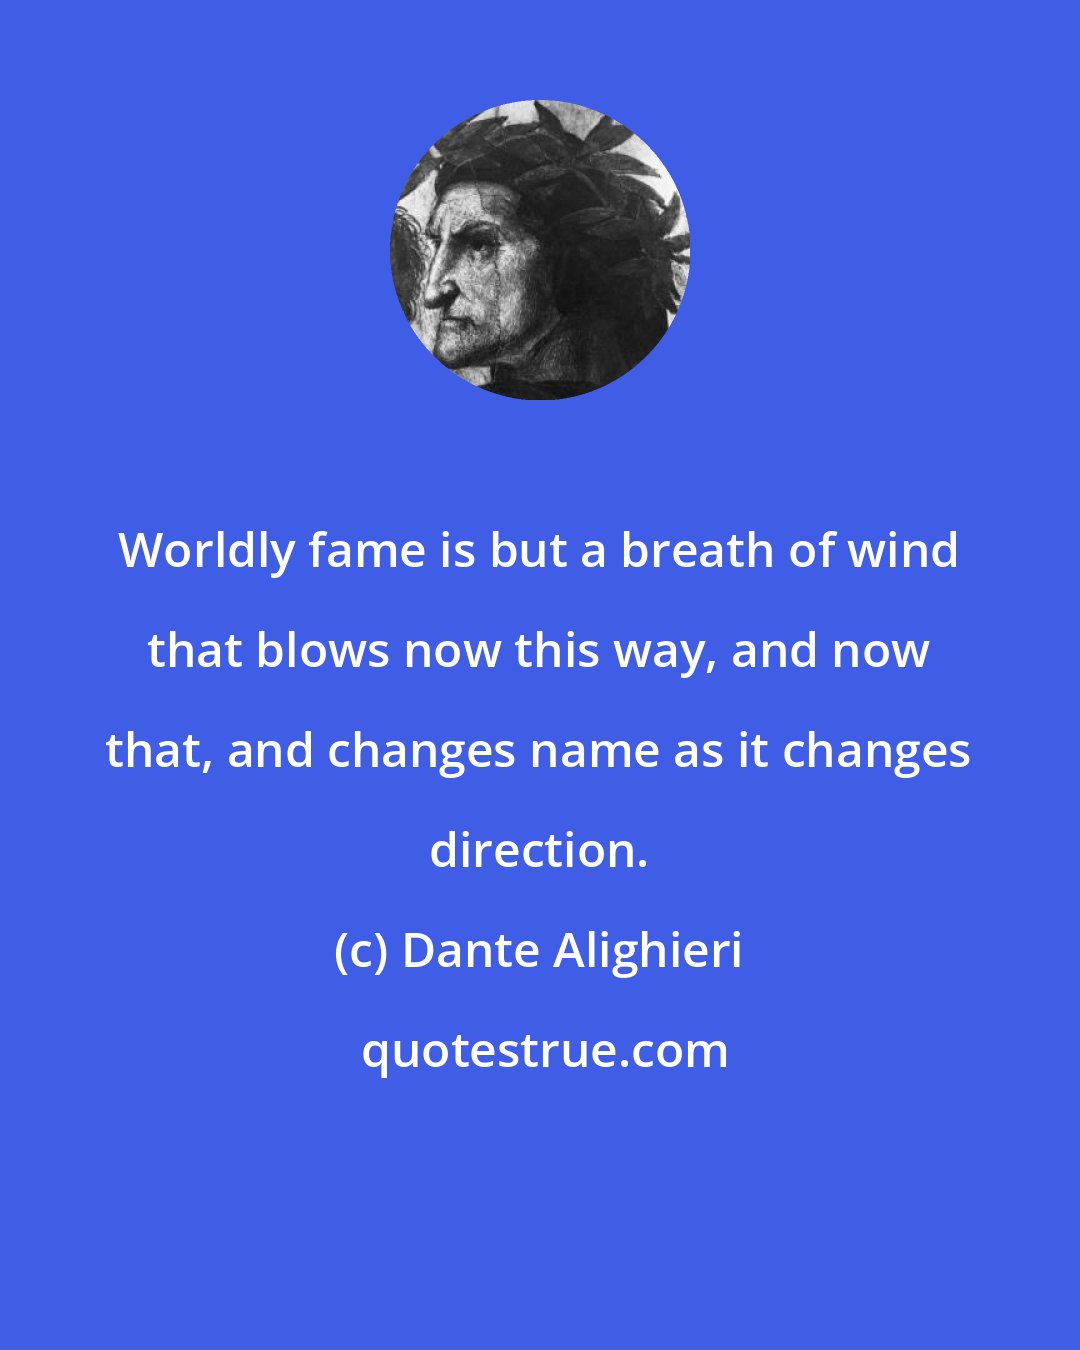 Dante Alighieri: Worldly fame is but a breath of wind that blows now this way, and now that, and changes name as it changes direction.